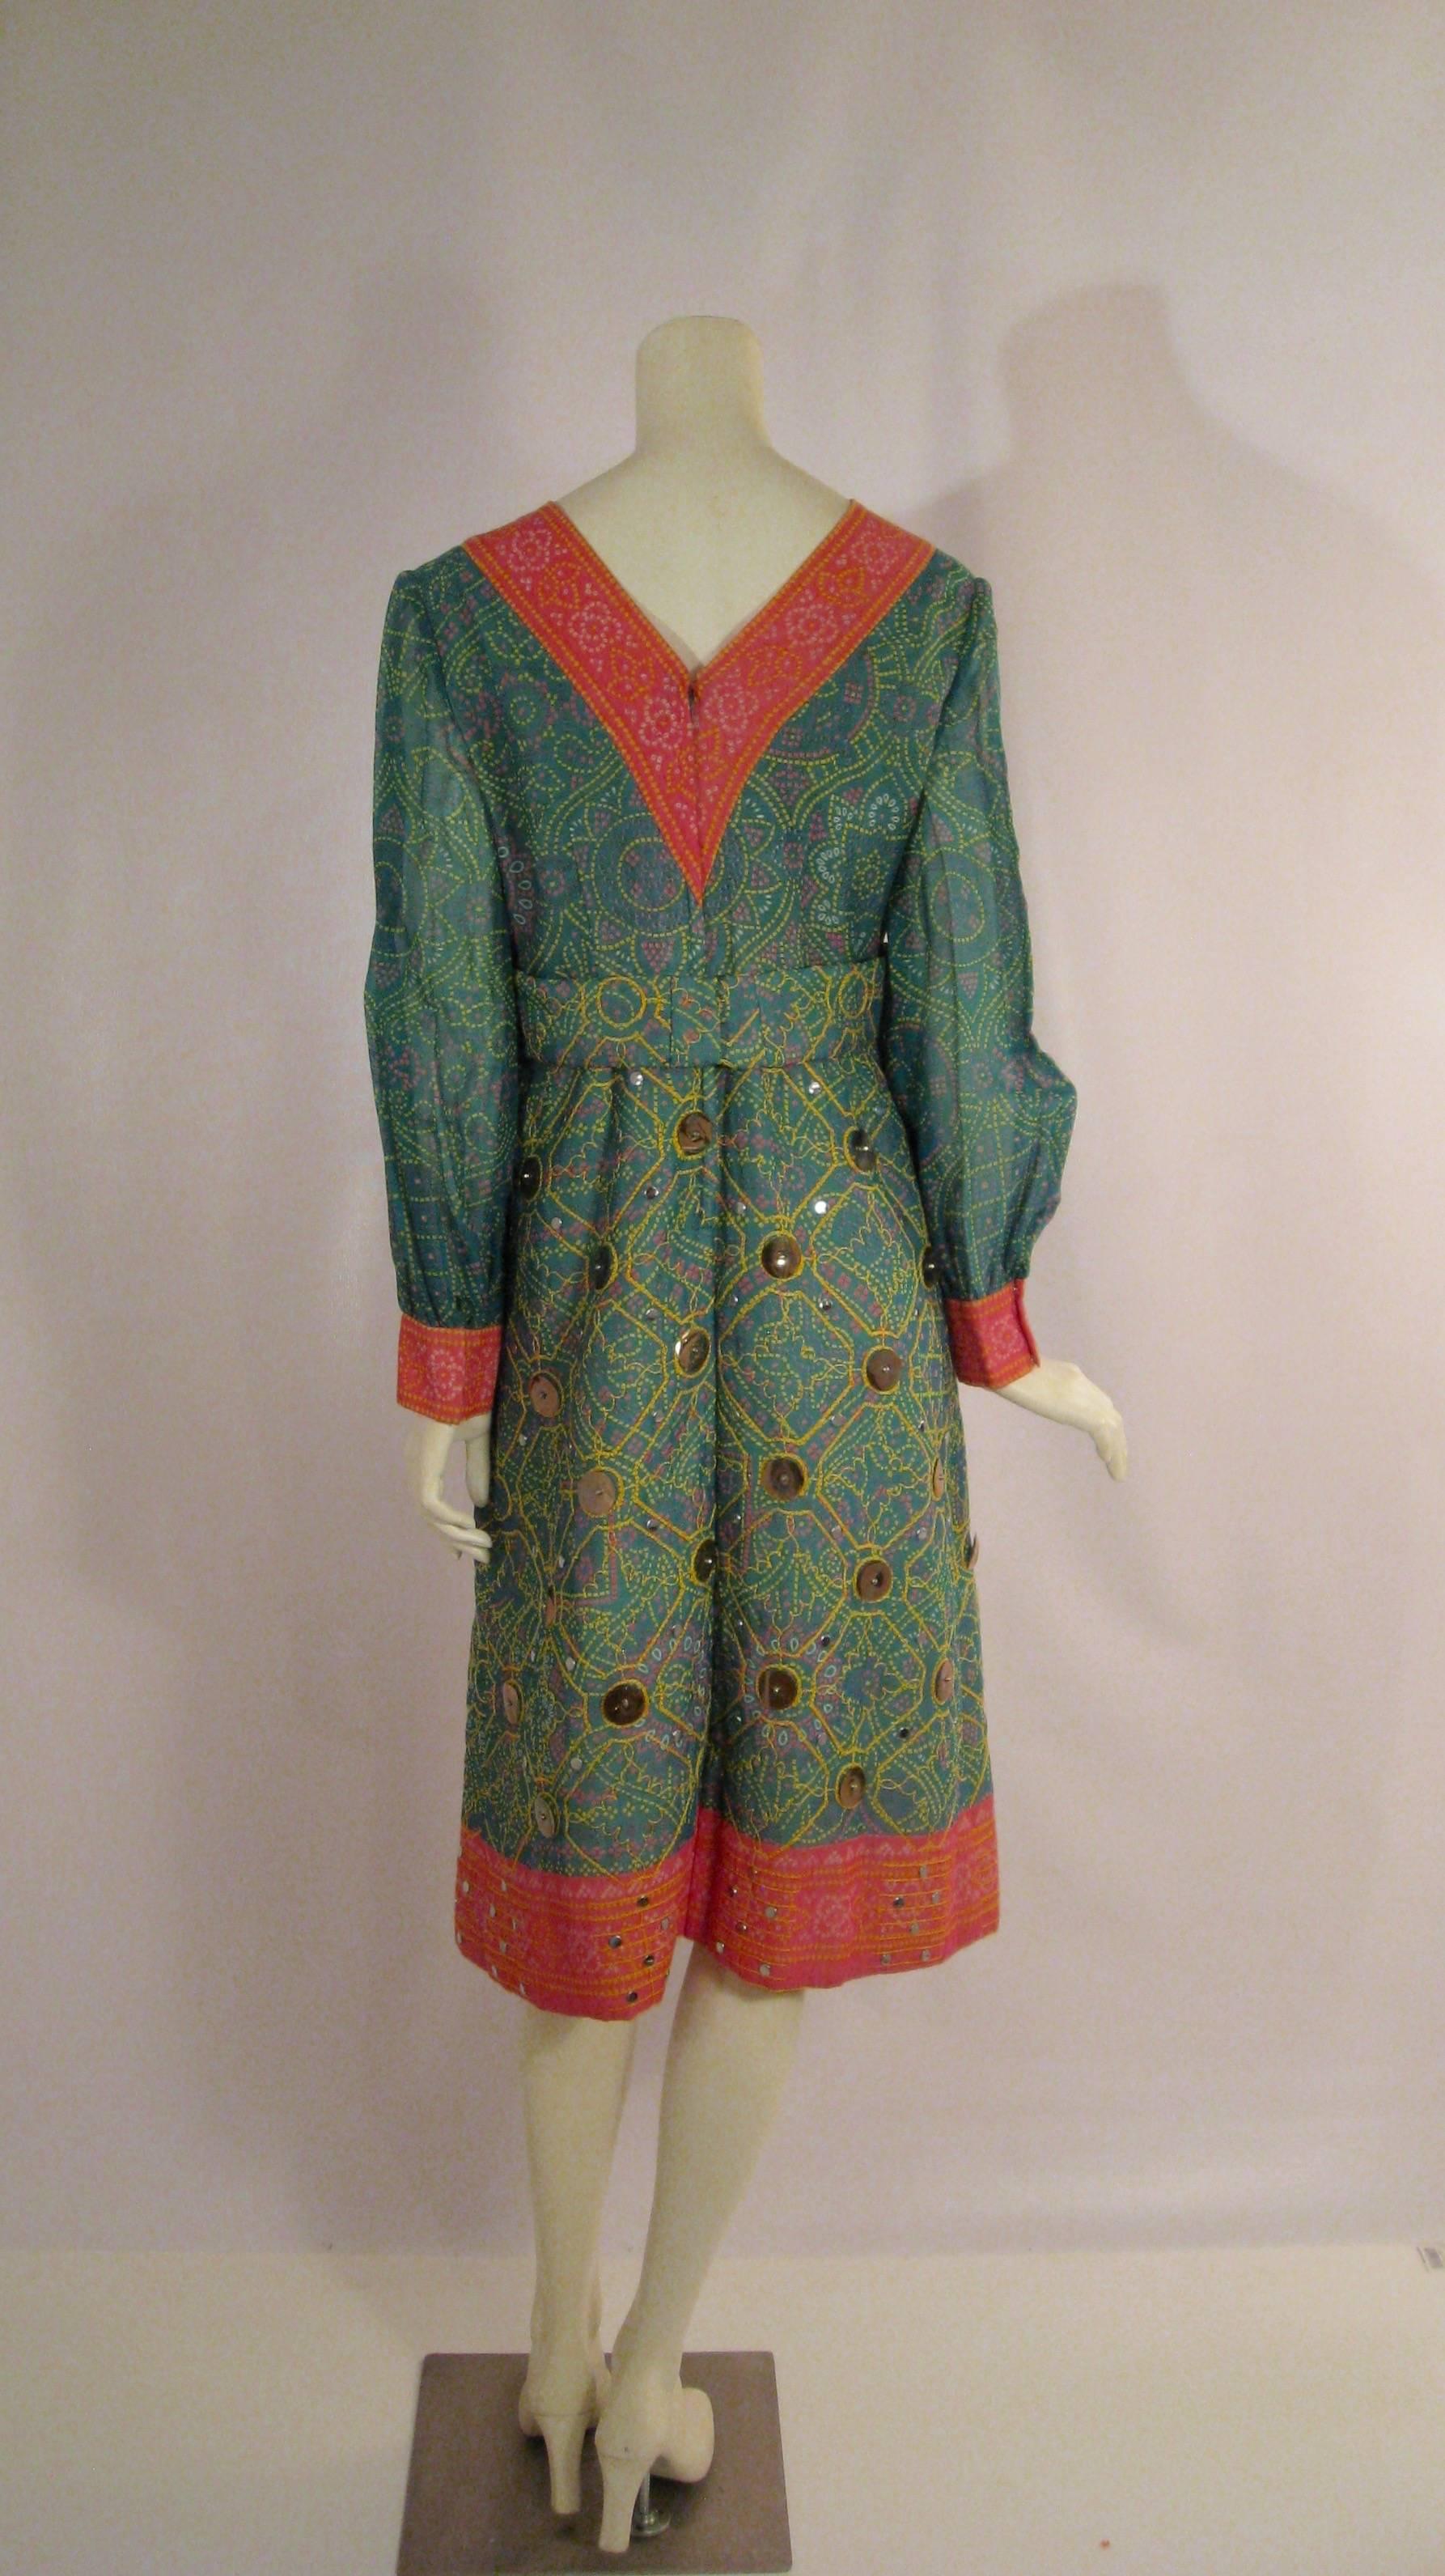 Oscar de la Renta Attributed 1970s Ethnic Print Dress with Embroidery Paillettes 3